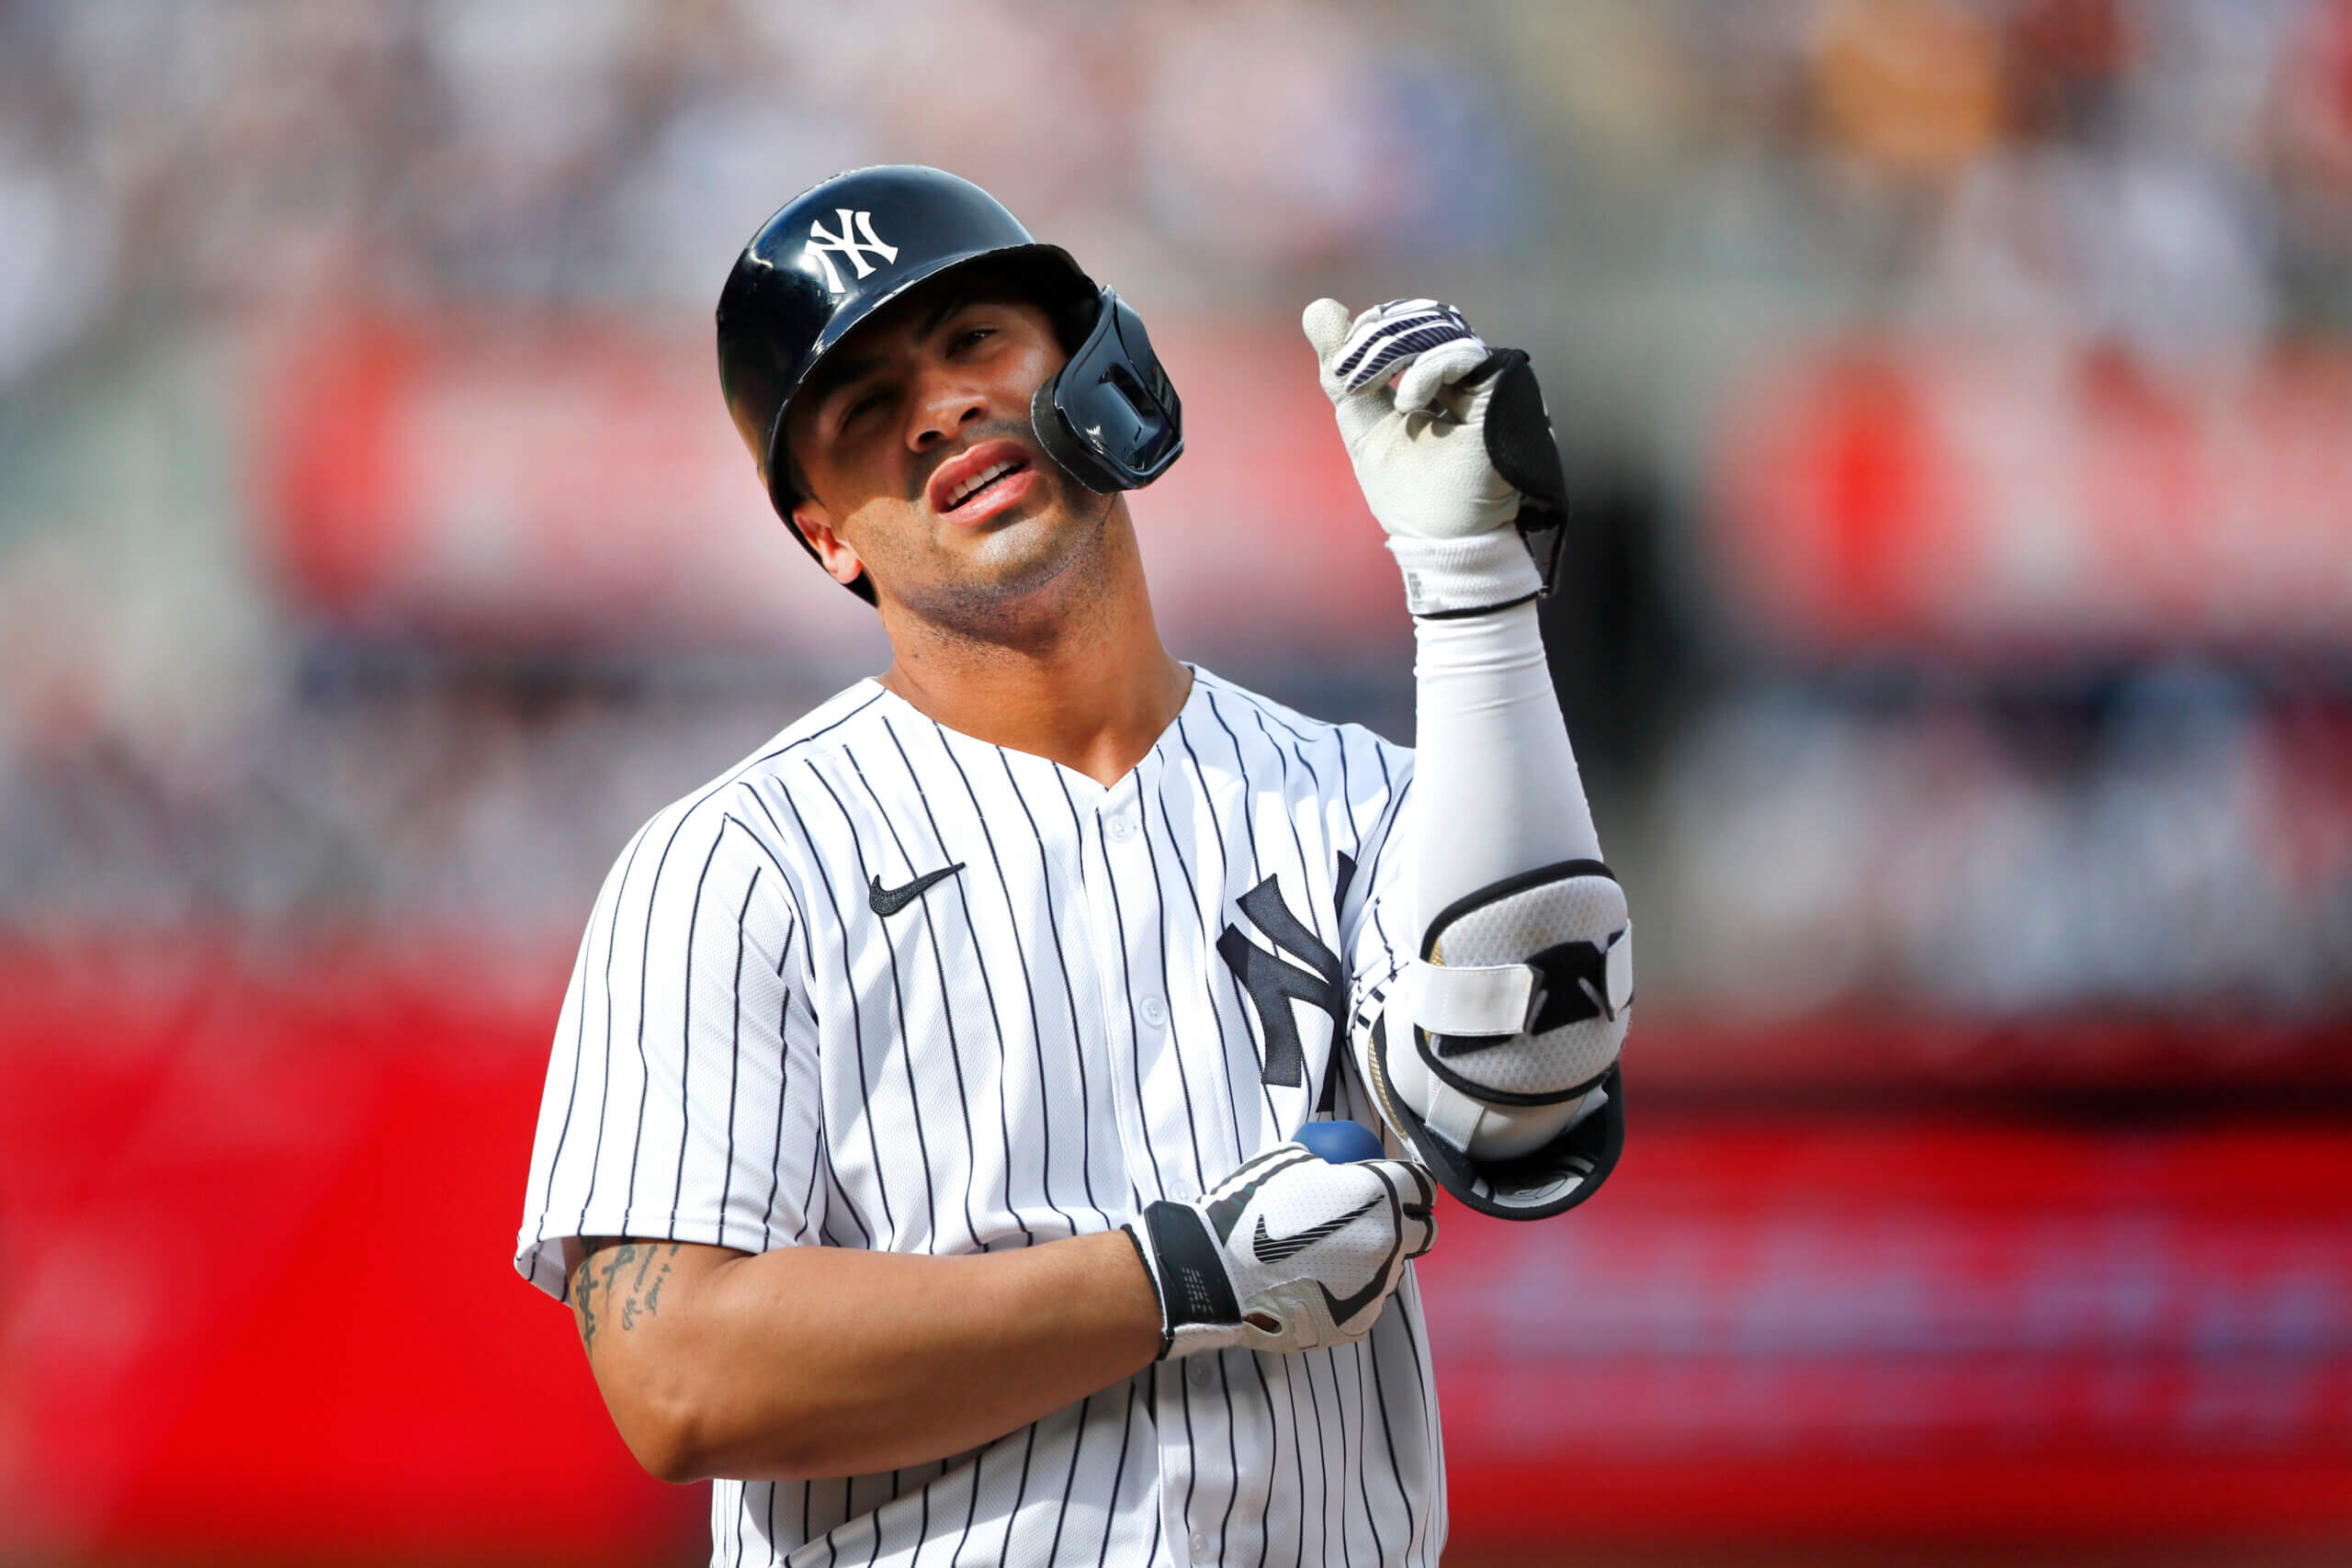 What happened to Gleyber Torres?